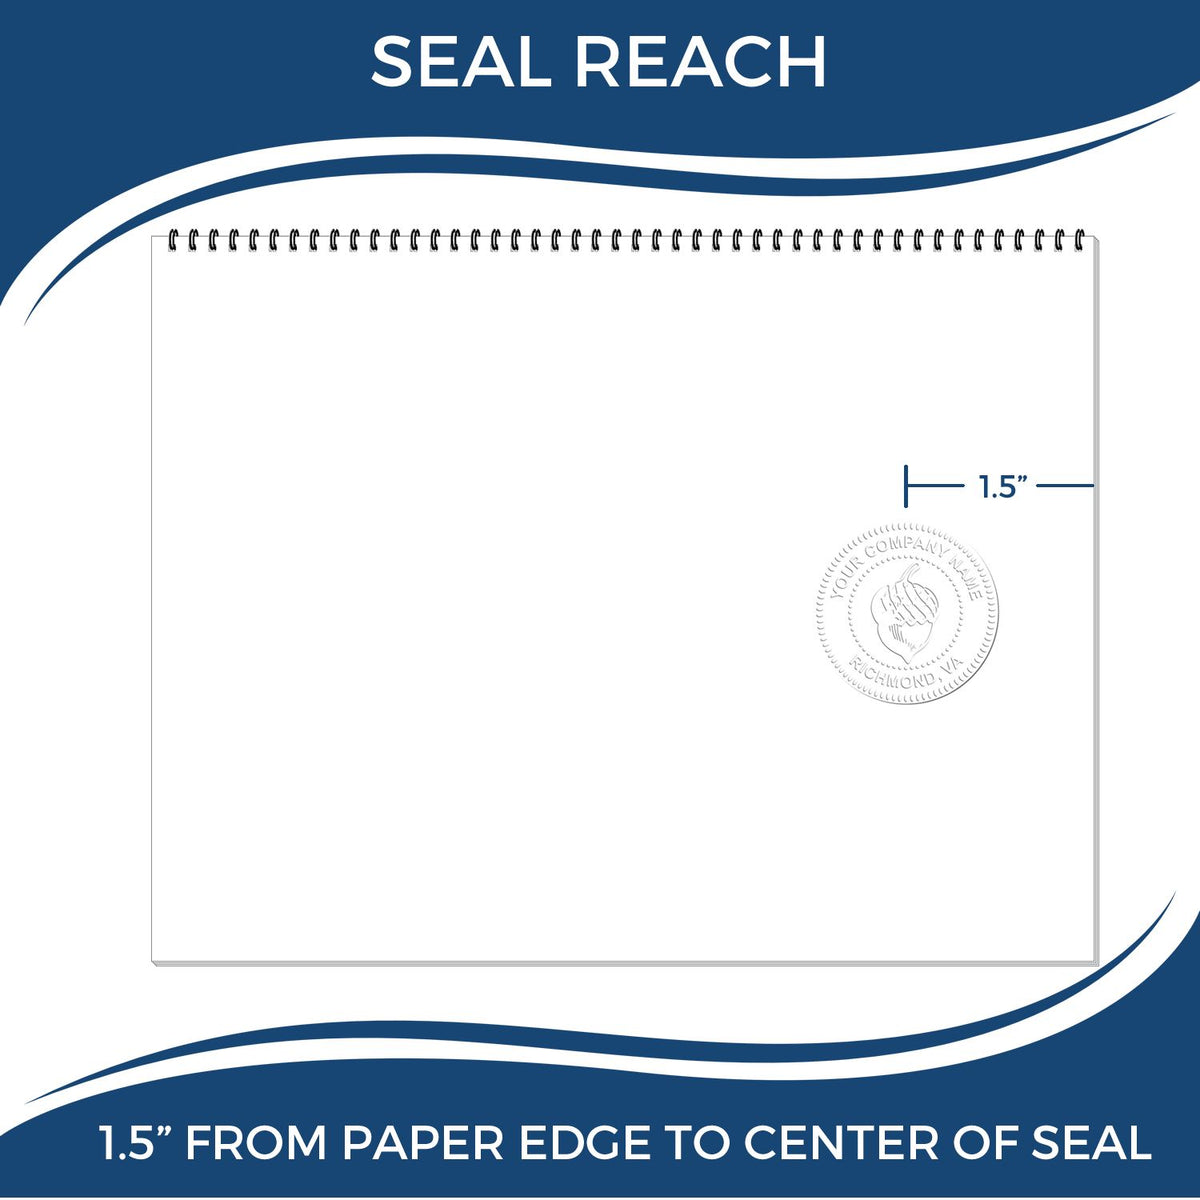 An infographic showing the seal reach which is represented by a ruler and a miniature seal image of the Indiana Desk Surveyor Seal Embosser